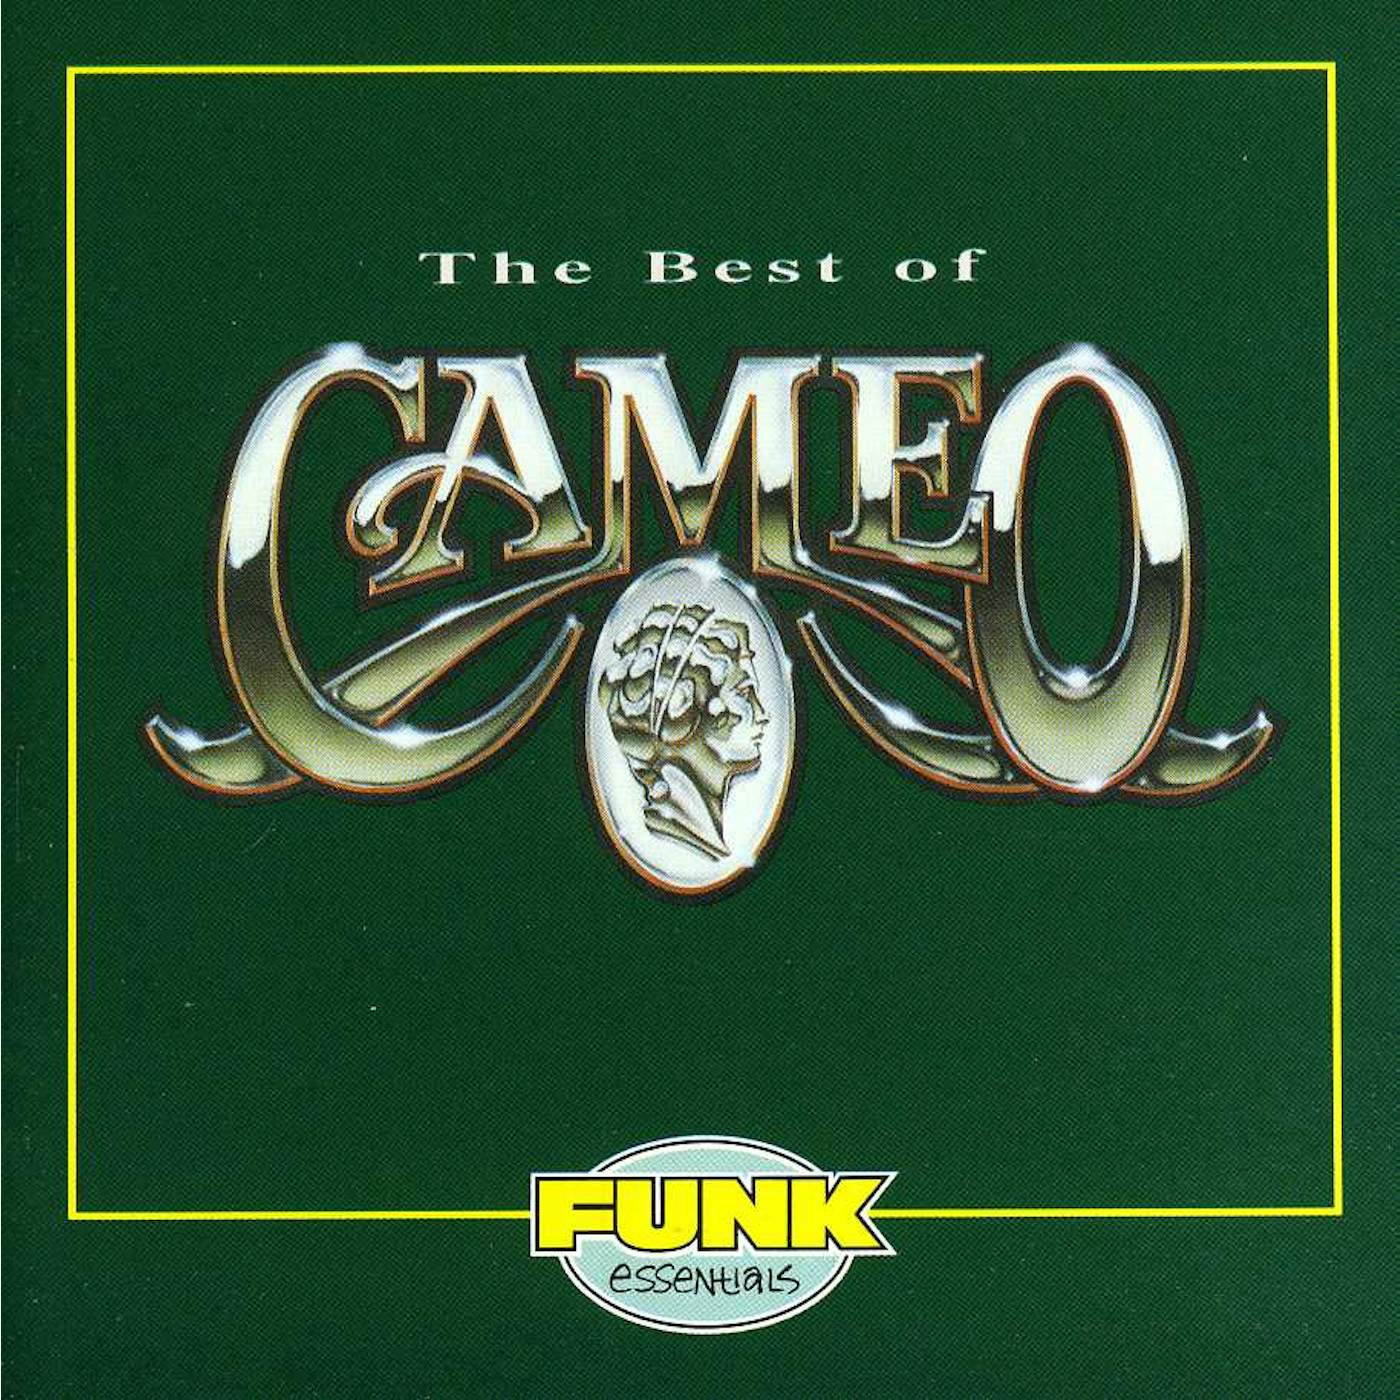 Cameo BEST OF CD